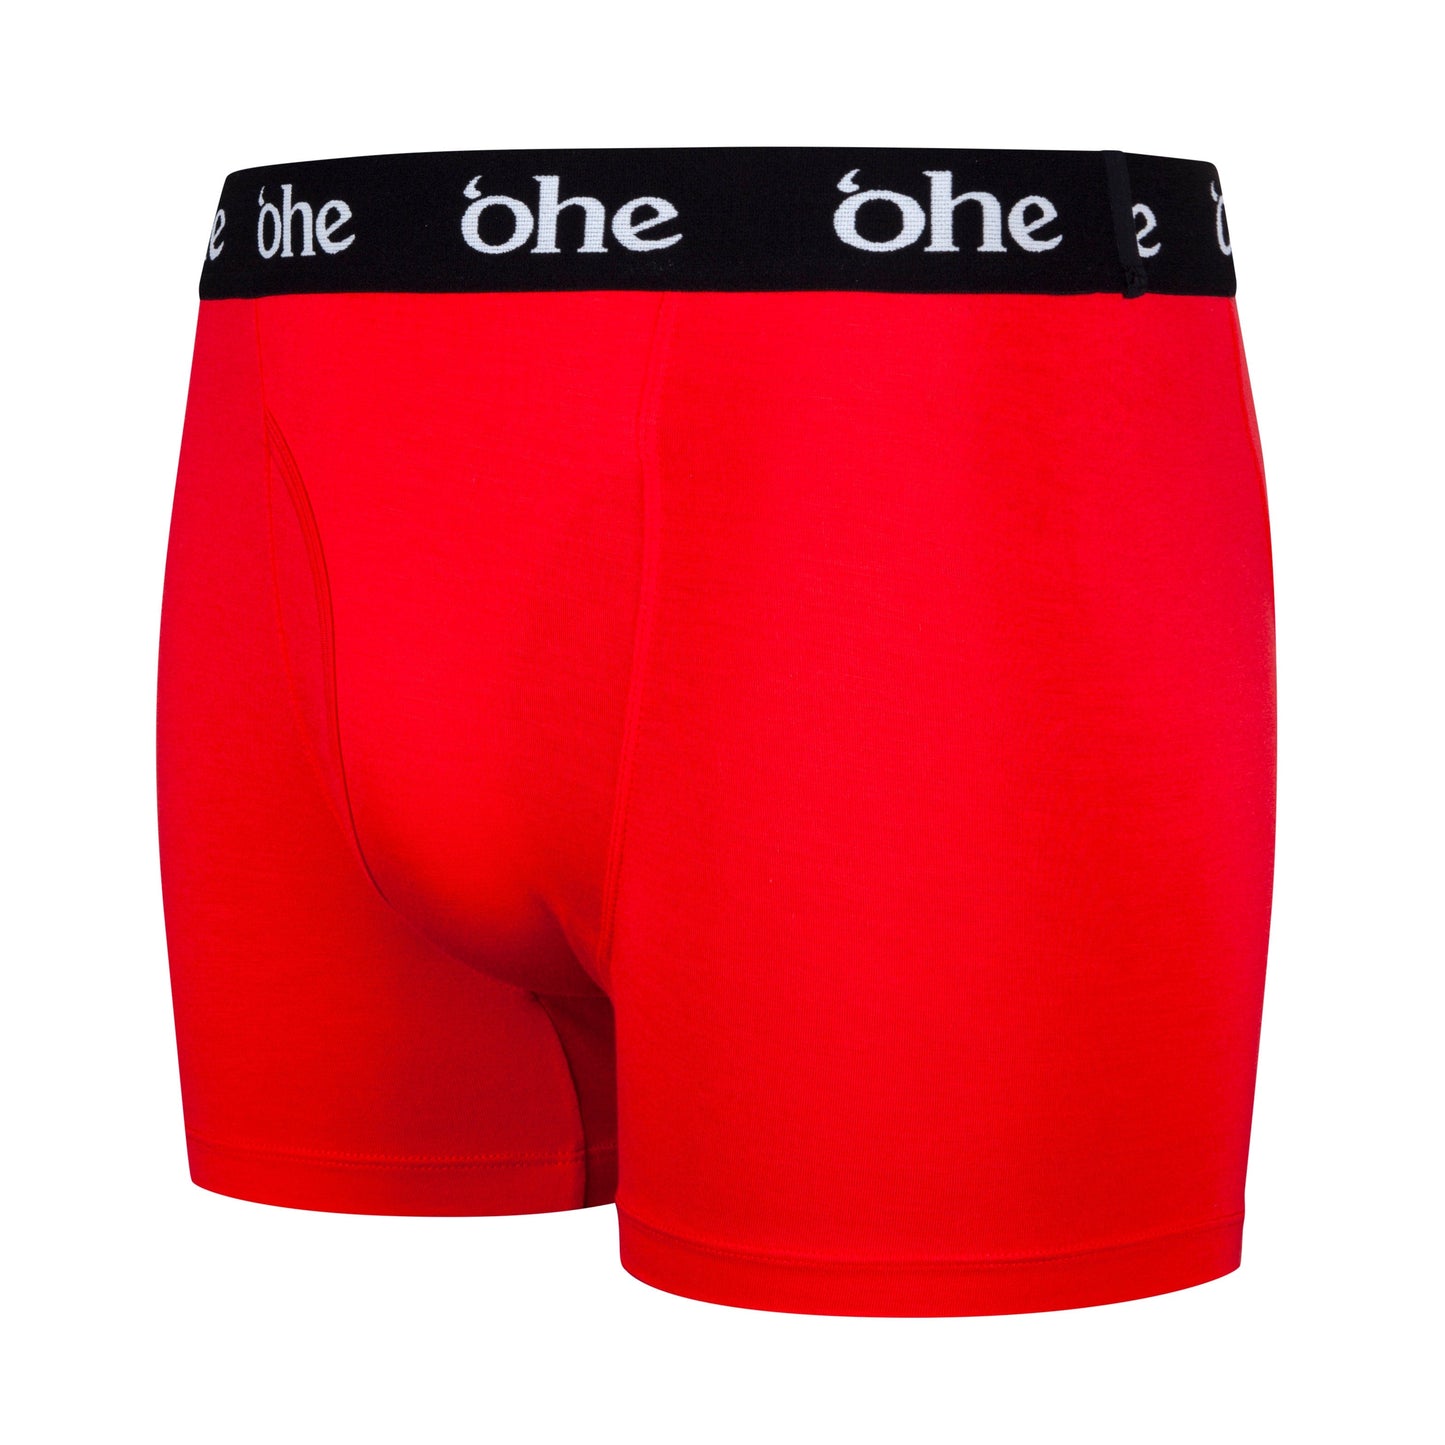 Diagonal view of red men's bamboo underwear boxer shorts with black waist band and white 'ohe logo